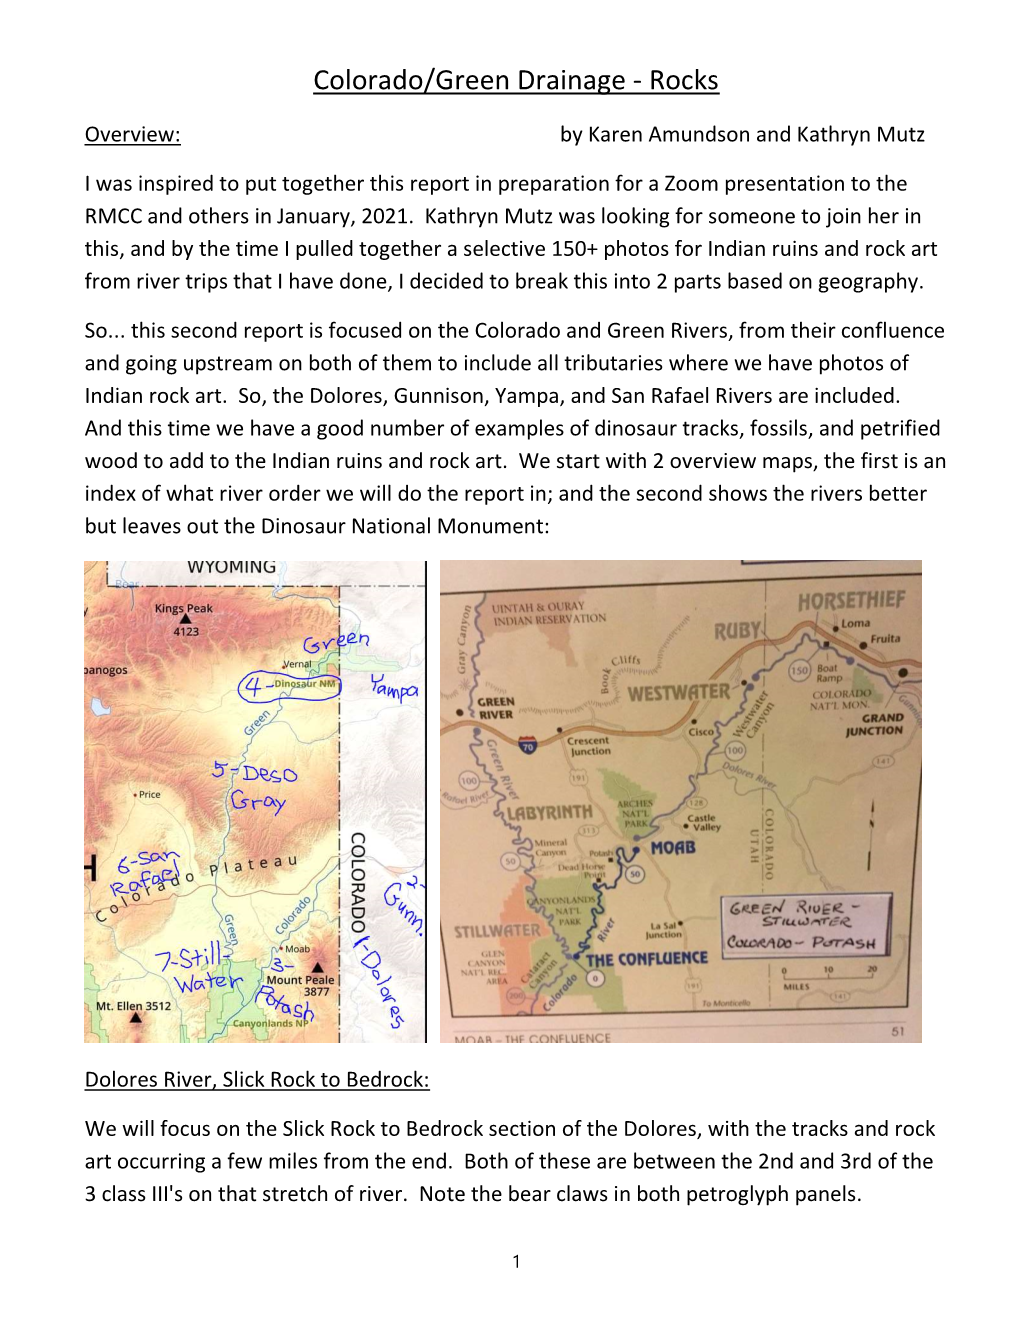 Colorado and Green Rivers, from Their Confluence and Going Upstream on Both of Them to Include All Tributaries Where We Have Photos of Indian Rock Art